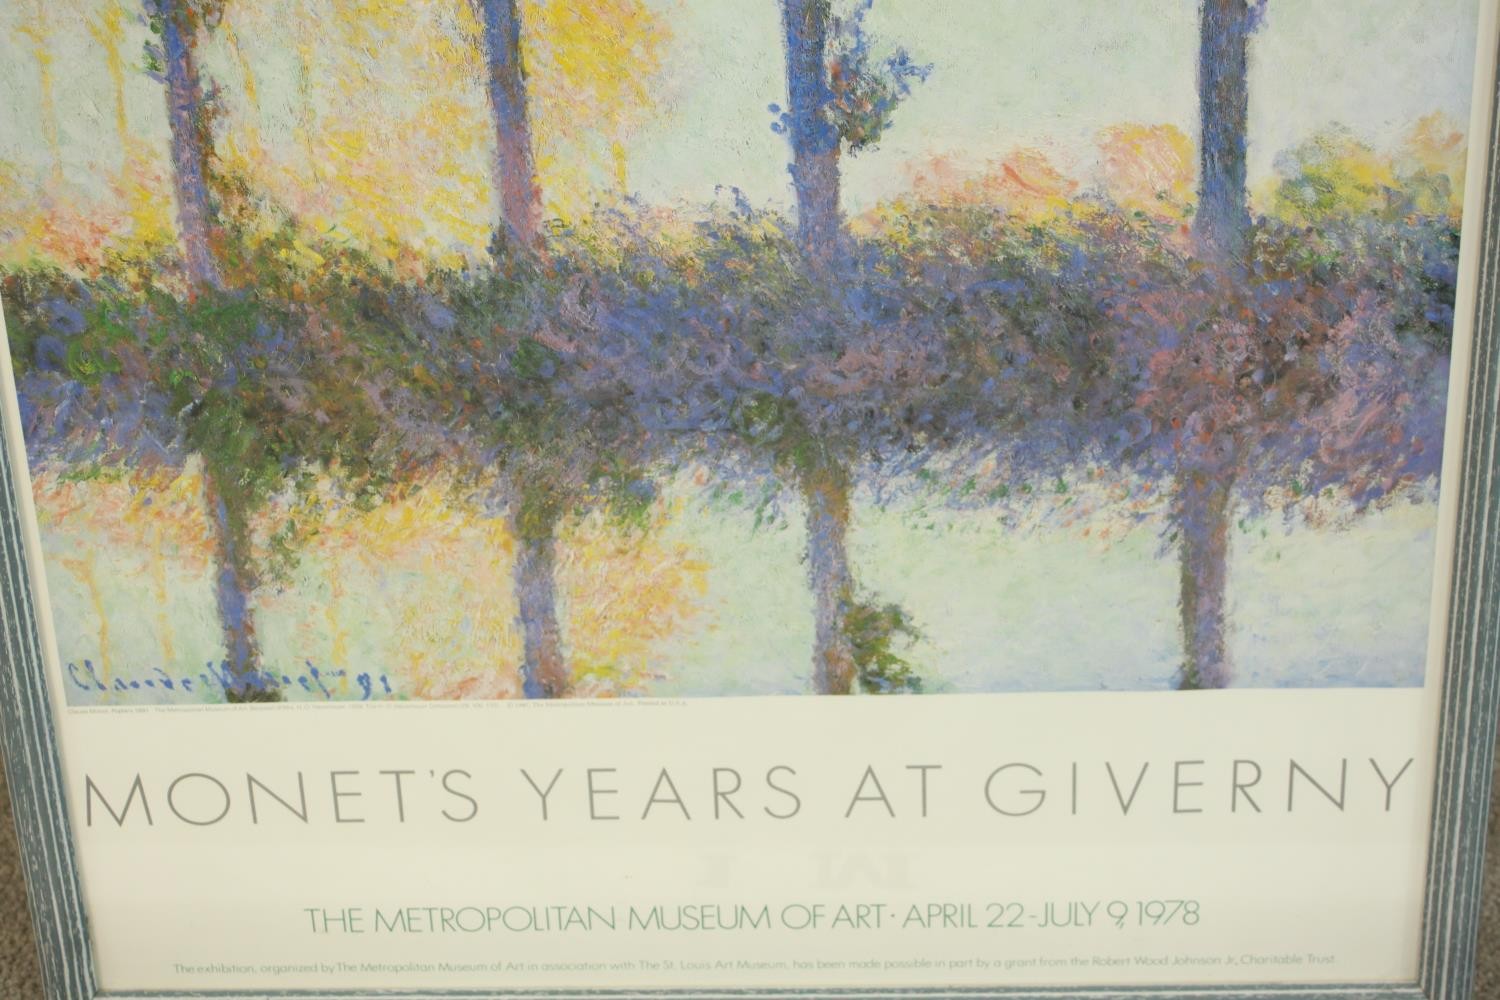 Monet's Years at Giverny, a mid 20th century exhibition poster from the Metropolitan Museum of Art - Image 4 of 6